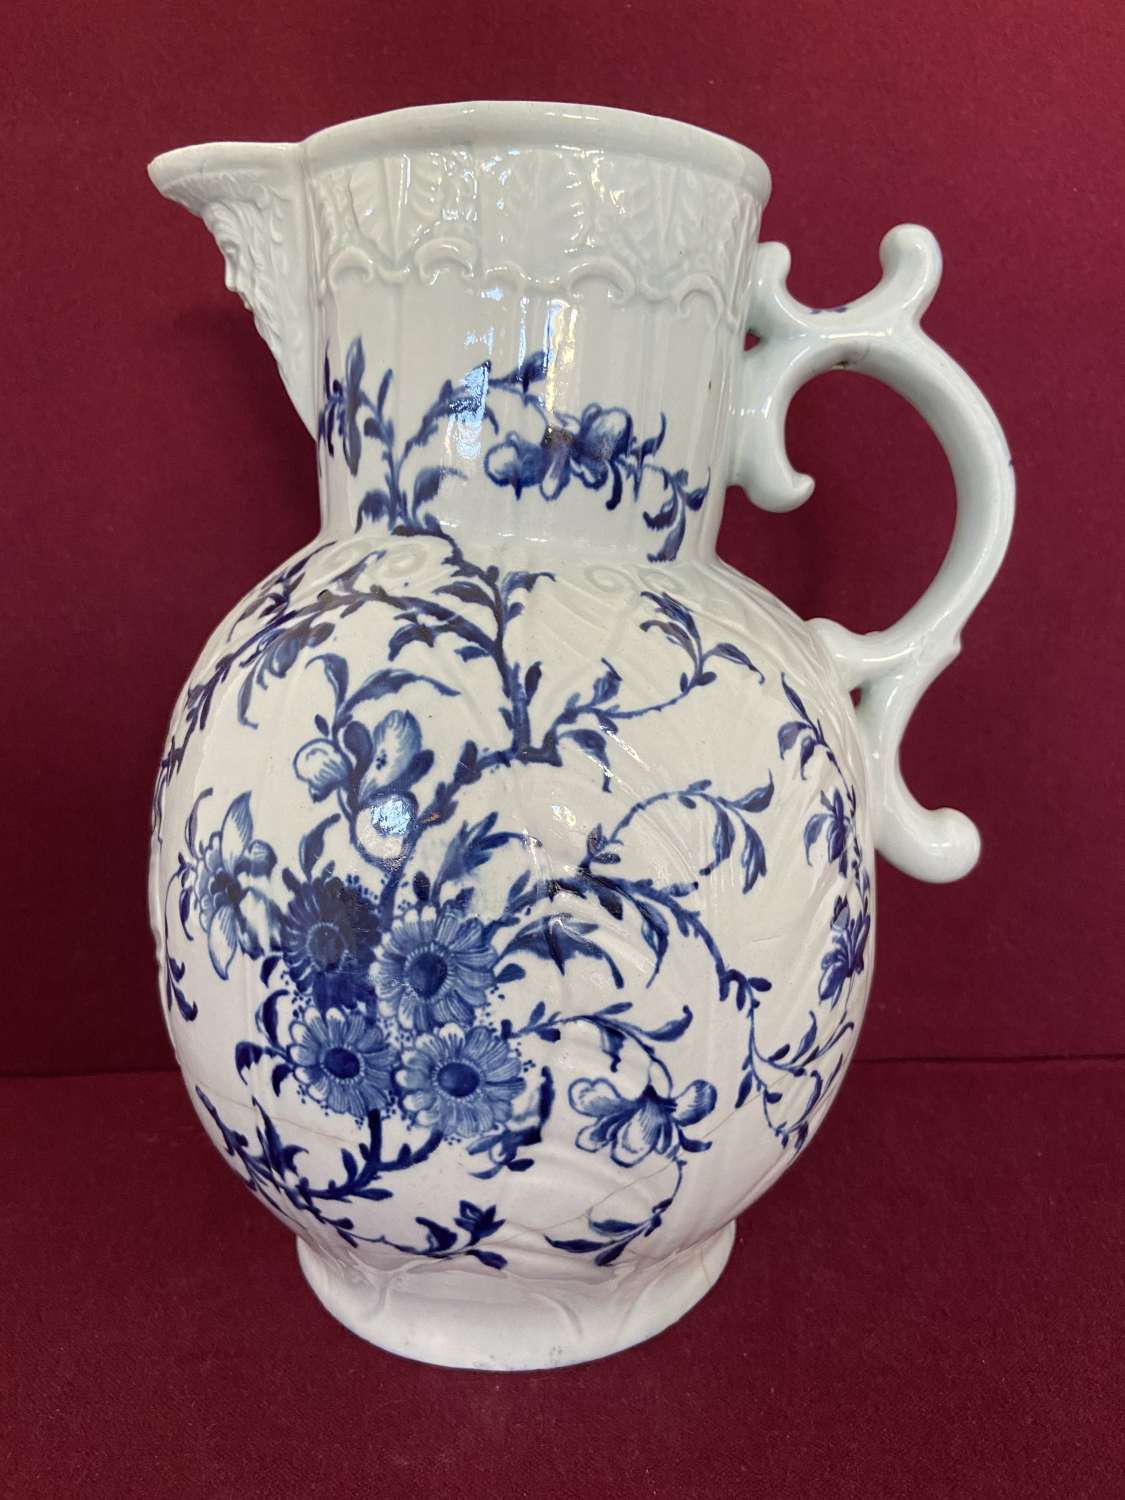 A rare and early Worcester Mask Jug c.1760